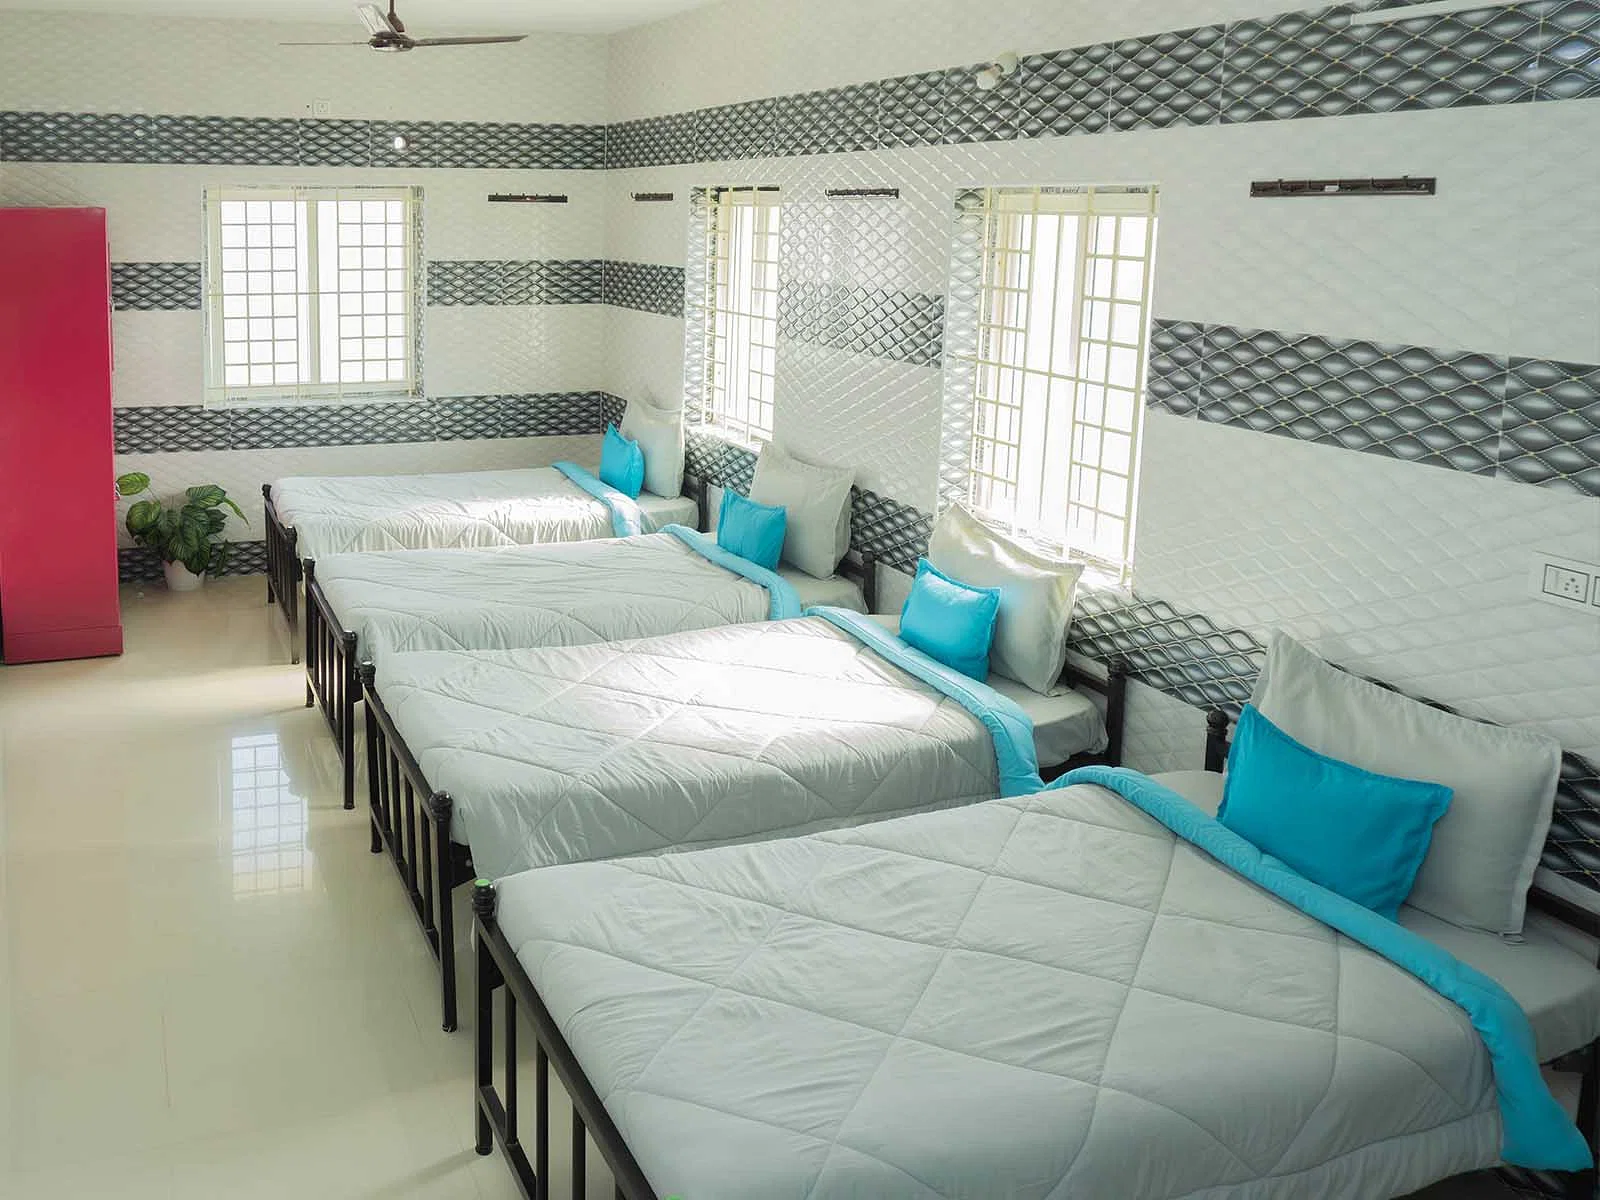 safe and affordable hostels for couple students with 24/7 security and CCTV surveillance-Zolo Epicurean Enclave